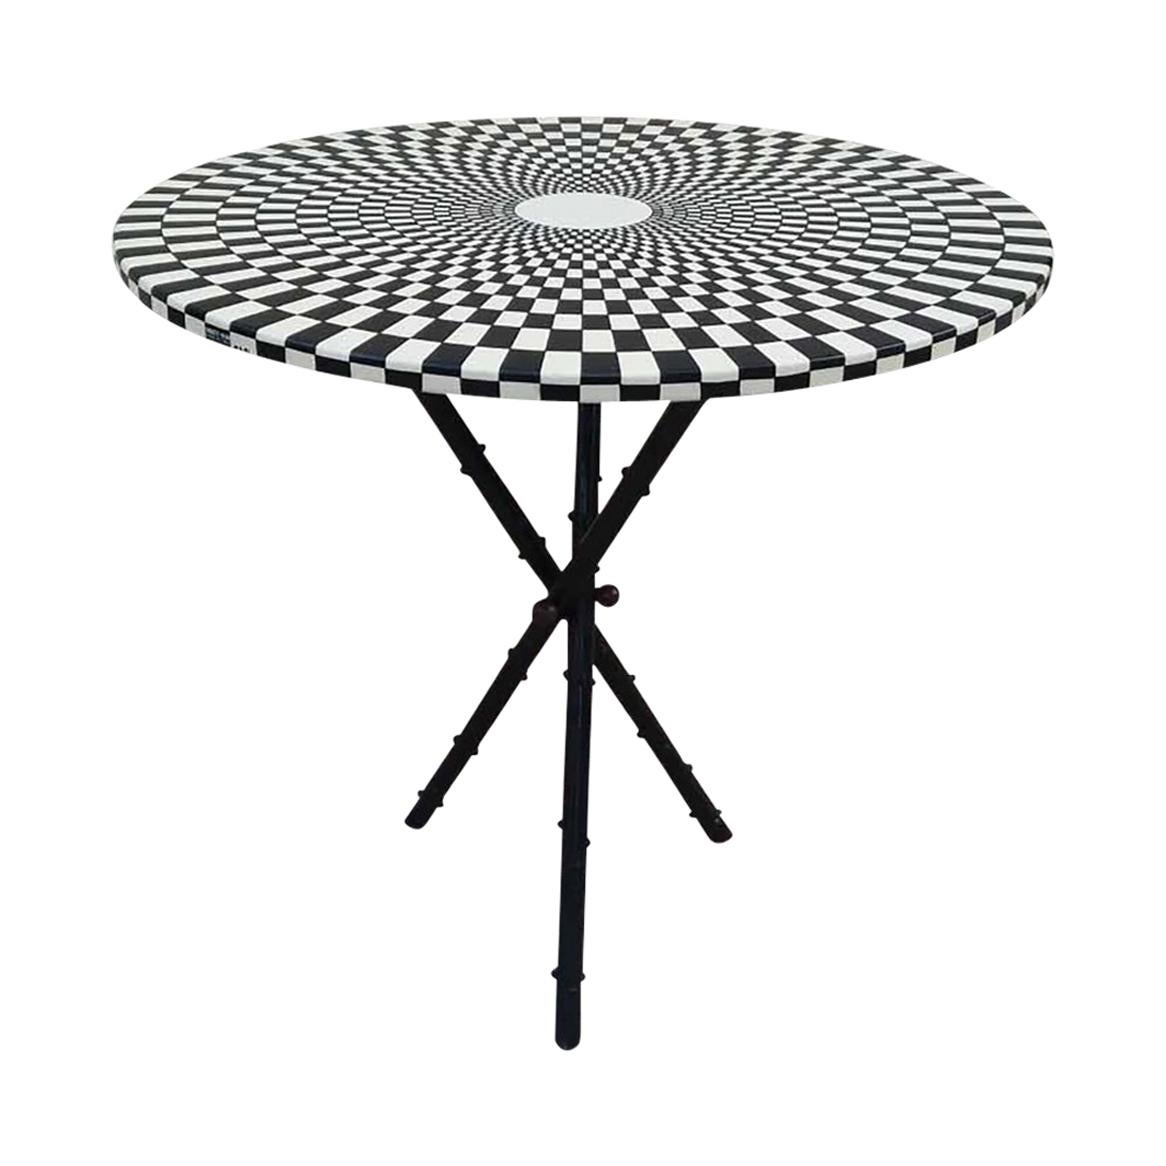 1960s Piero Fornasetti Side Table "Egocentrismo" For Sale